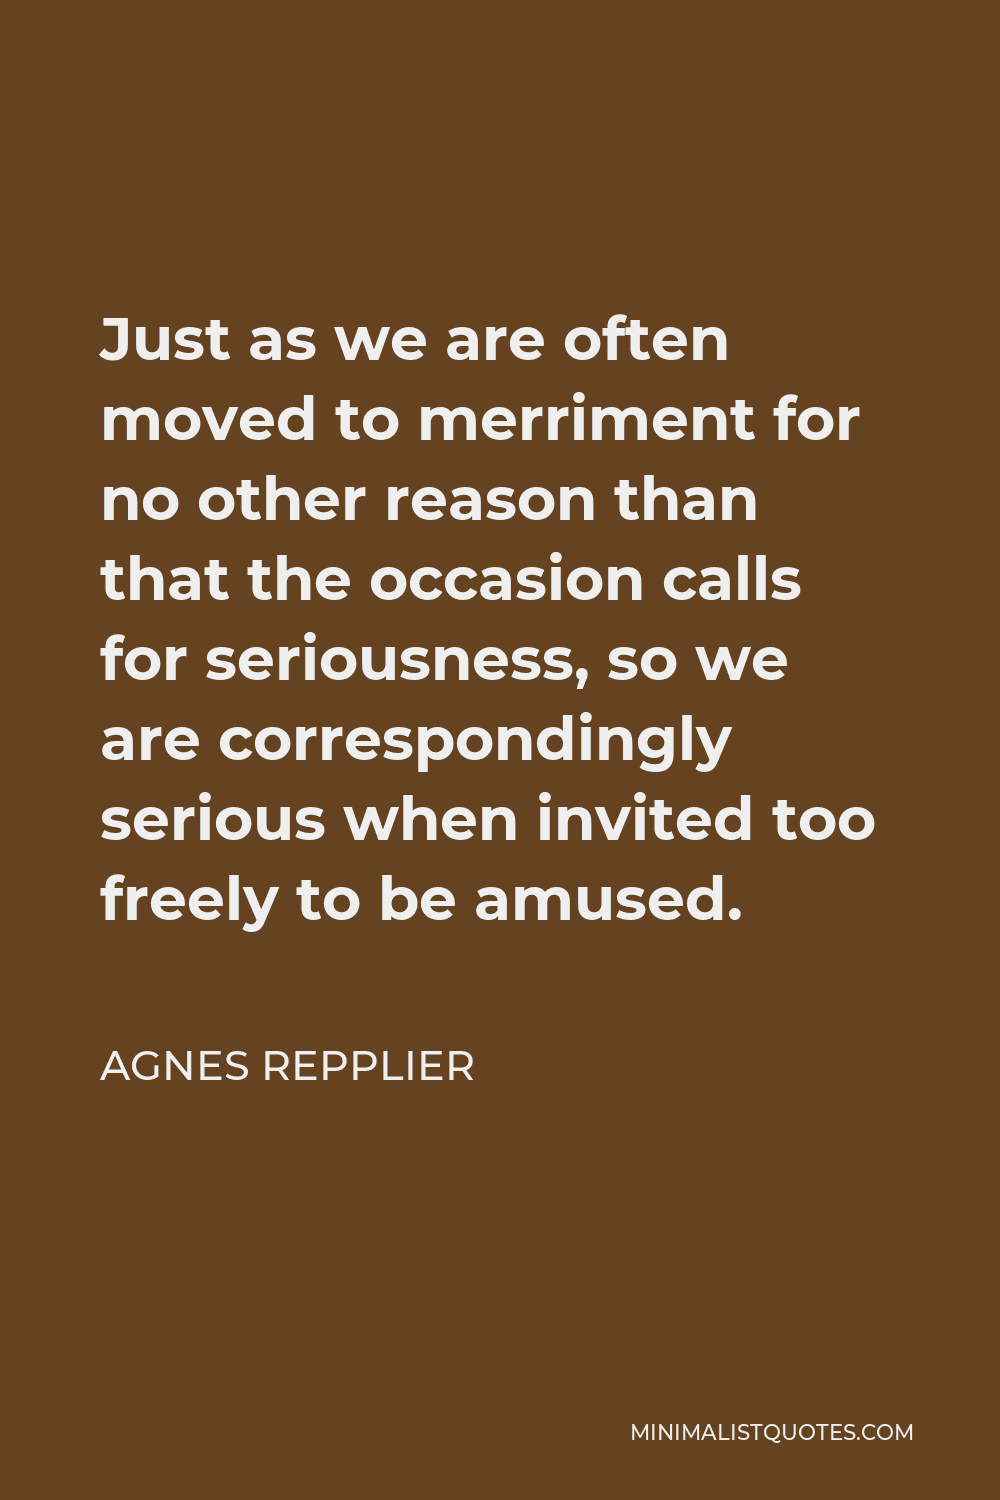 Agnes Repplier Quote - Just as we are often moved to merriment for no other reason than that the occasion calls for seriousness, so we are correspondingly serious when invited too freely to be amused.